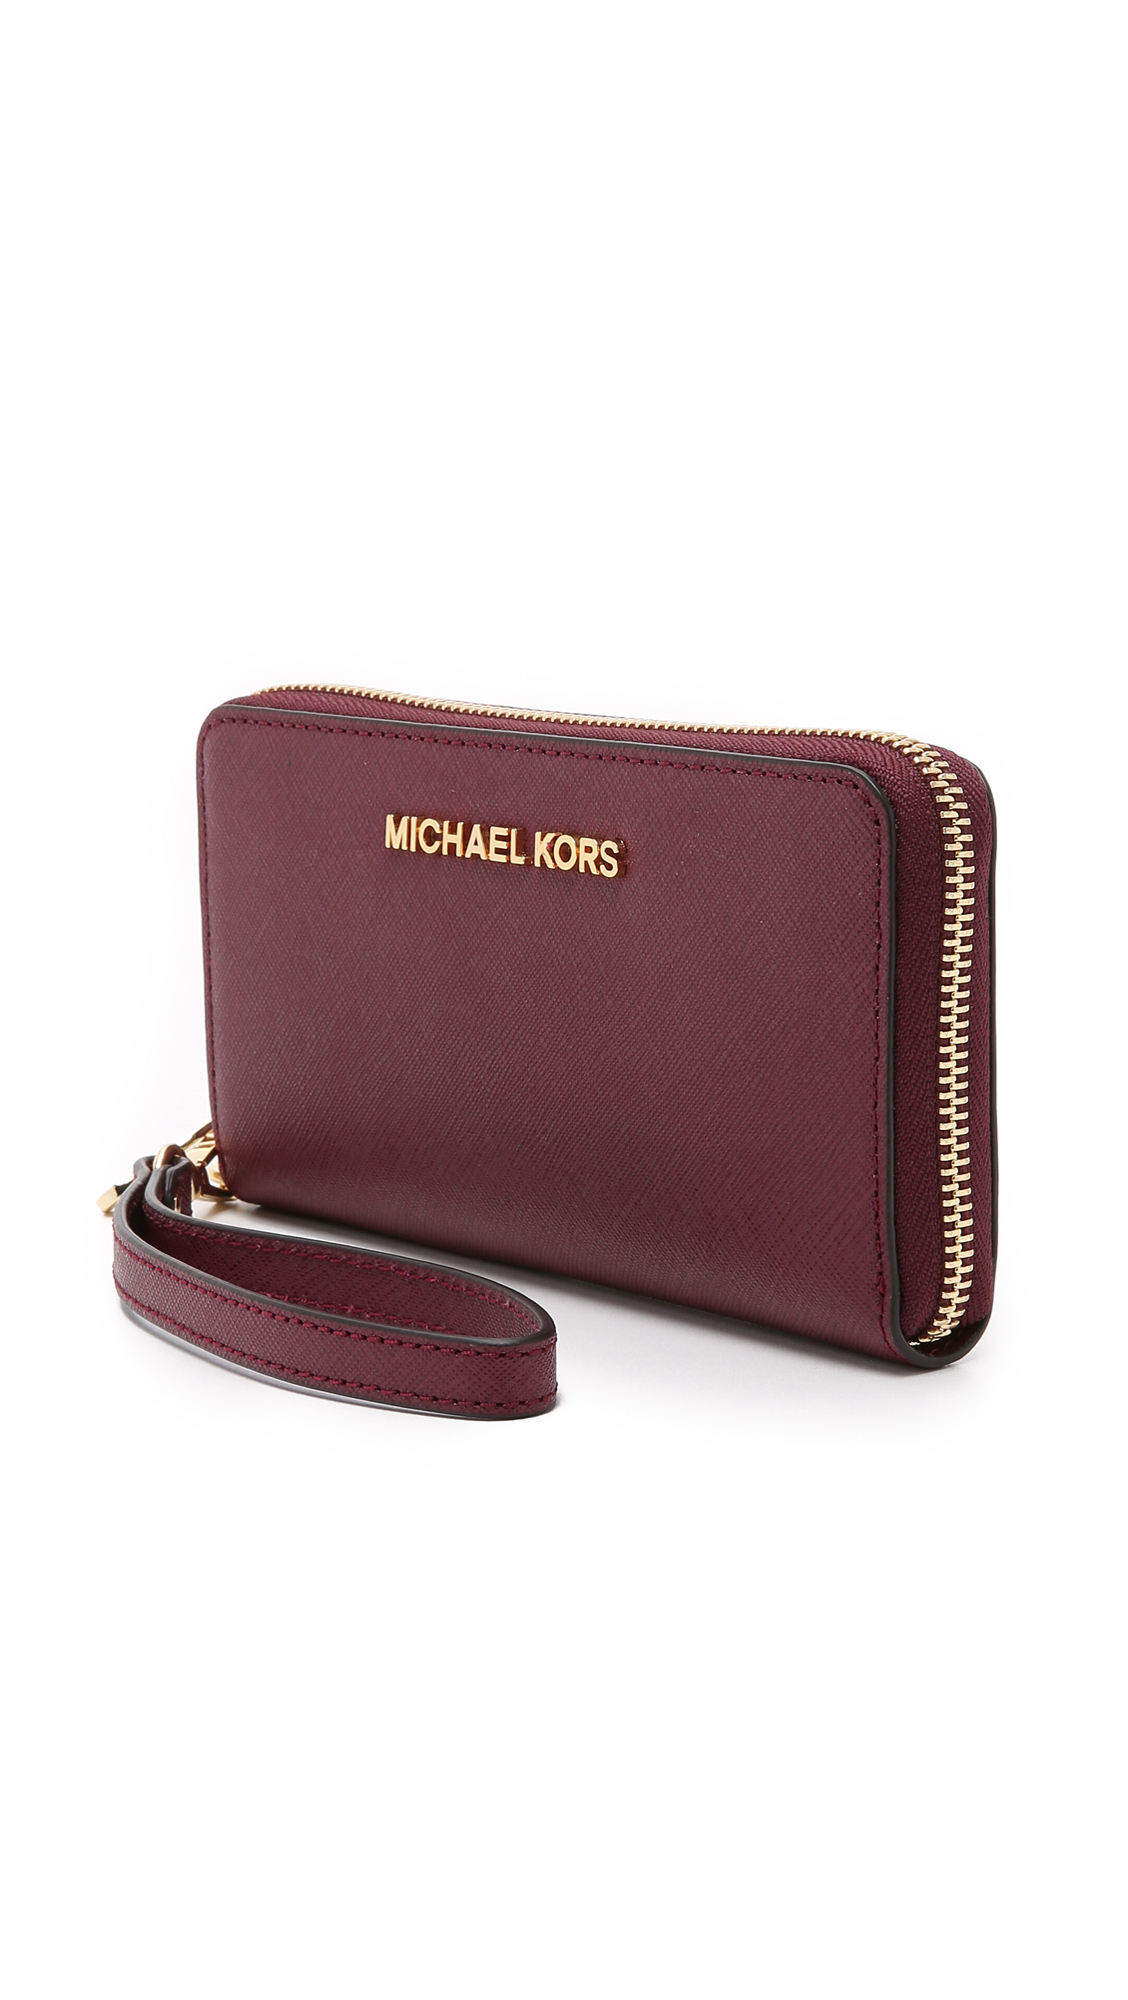 michael kors large multifunction wallet for iphone 5 5s red